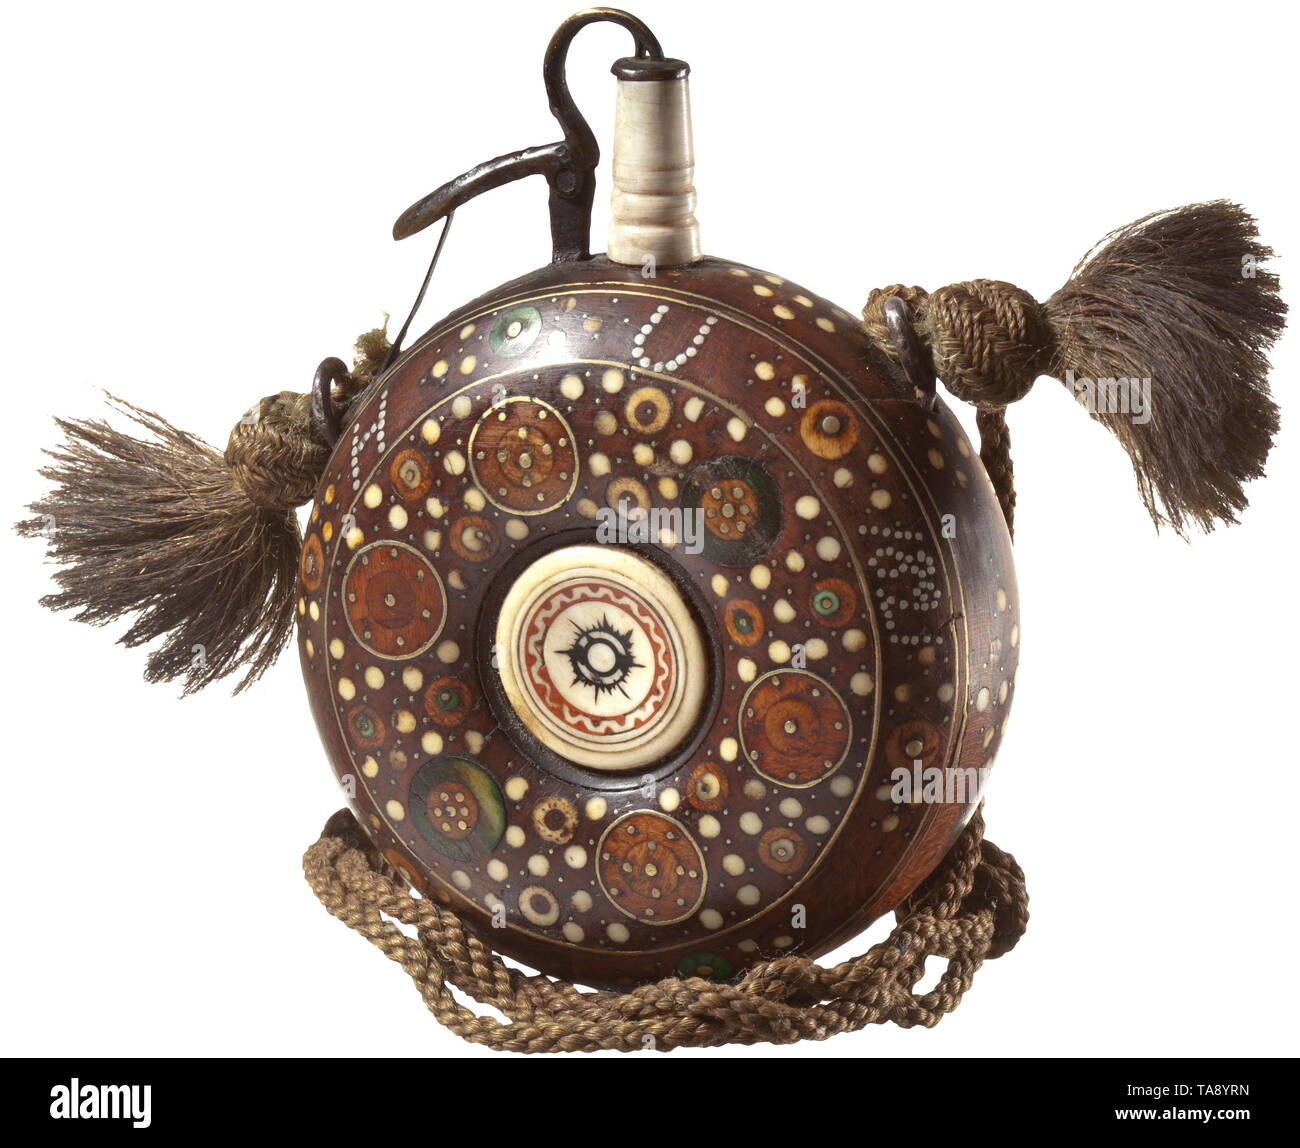 A German bone-inlaid powder flask, circa 1620 Round wooden flask with circular and dot-shaped bone and brass inlays on both sides. In both centres turned varnish-inlaid disk of bone. Spring-mounted brass closure with later bone chute. On both sides of upper edge (later) silver nails with monogram 'H R 1729' and 'H U 1821', respectively. Diameter 8 cm. historic, historical, powder flask, accessory, accessories, military, militaria, object, objects, stills, utilities, utility, clipping, clippings, cut out, cut-out, cut-outs, utensil, piece of equip, Additional-Rights-Clearance-Info-Not-Available Stock Photo